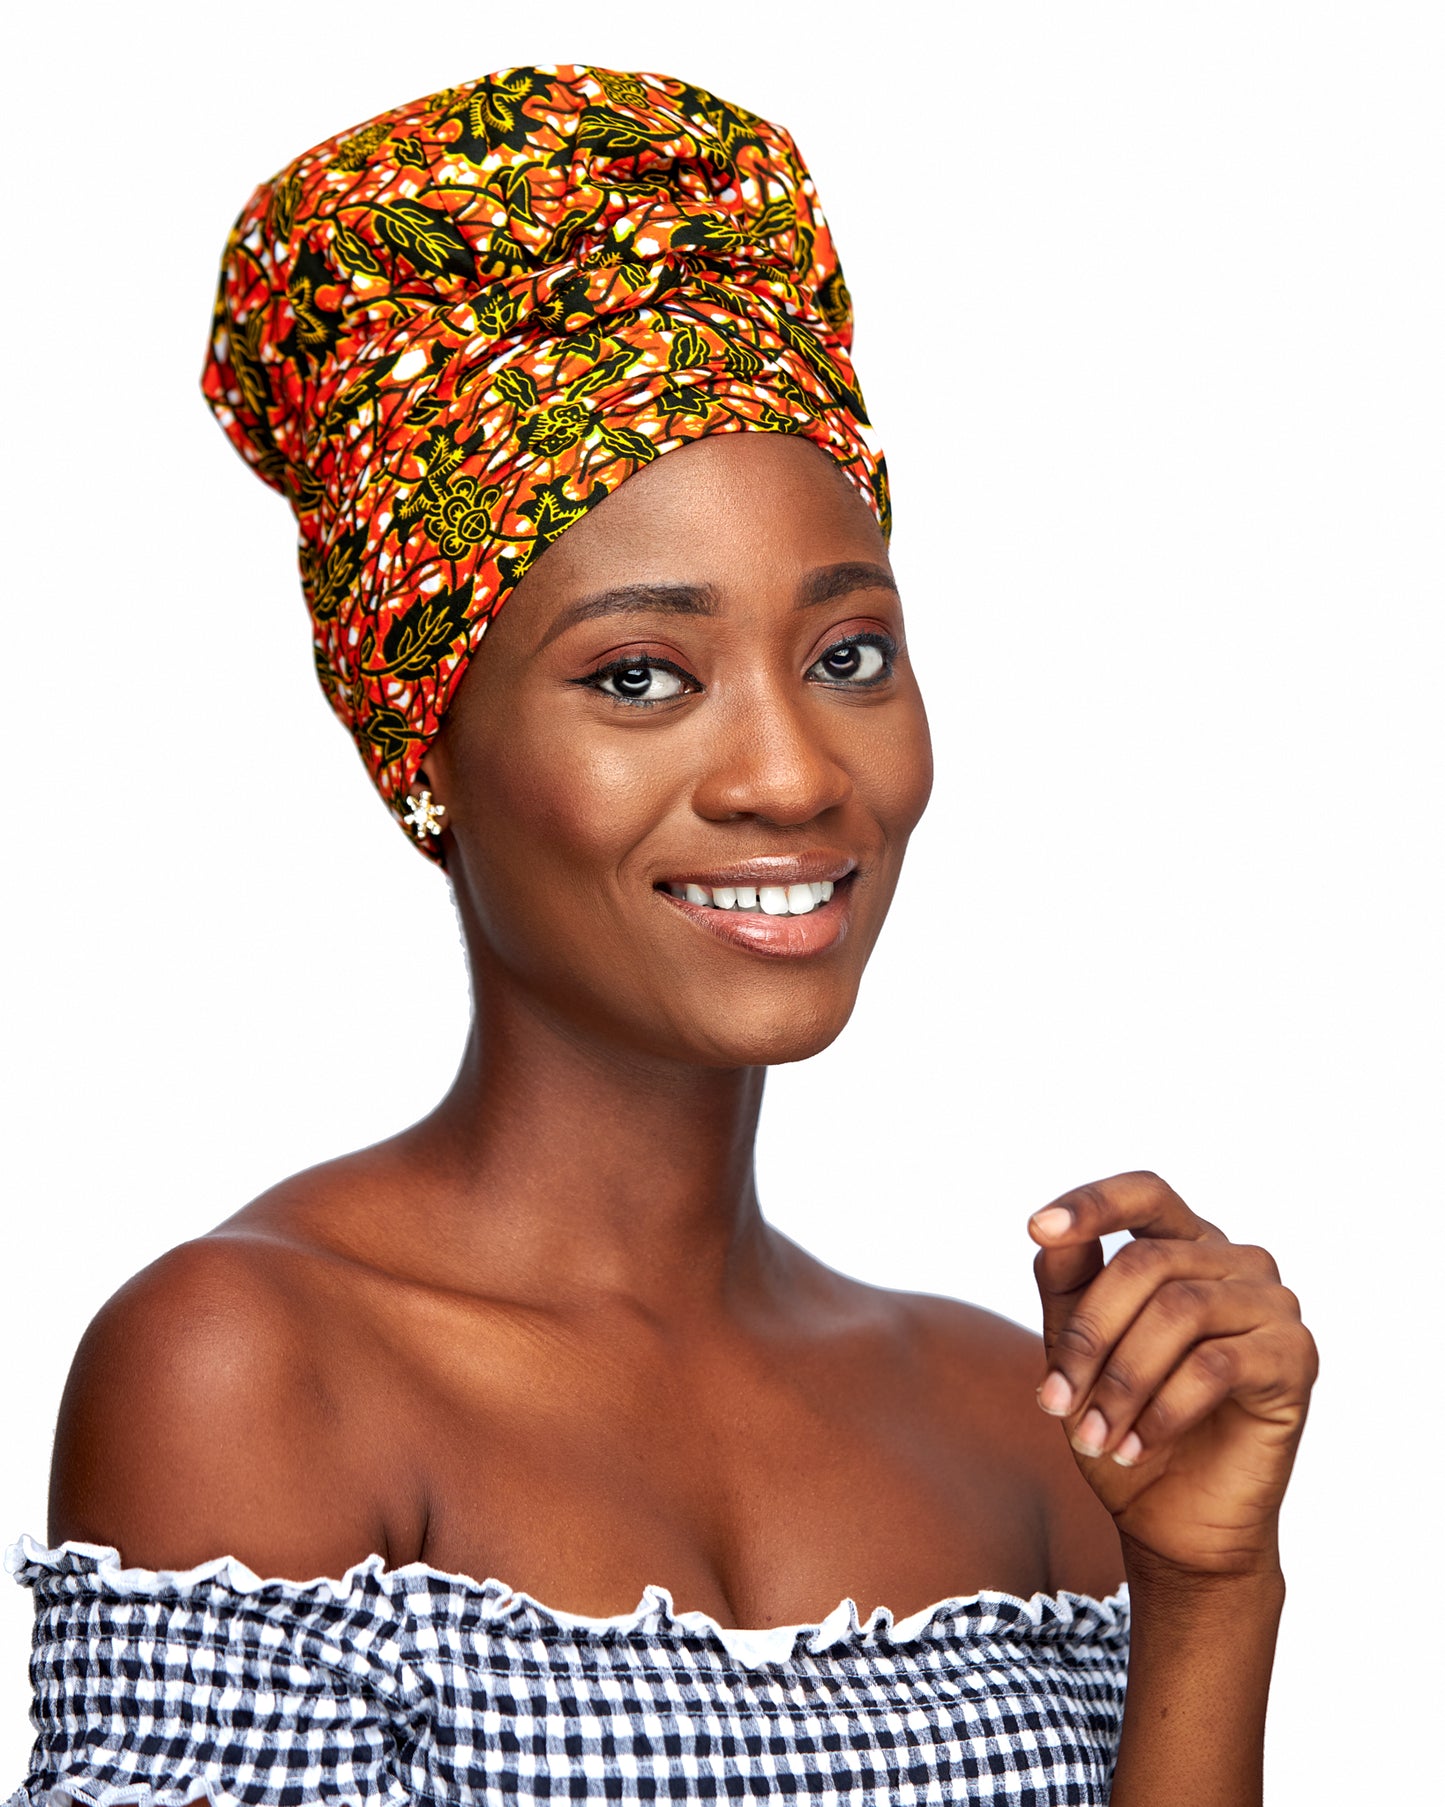 Ankara Wax Print Made of Orange, Gold, Black And White Blended Beautiful Colours And Pattern, Hand Made Elastic Silklined Bonnet With Band